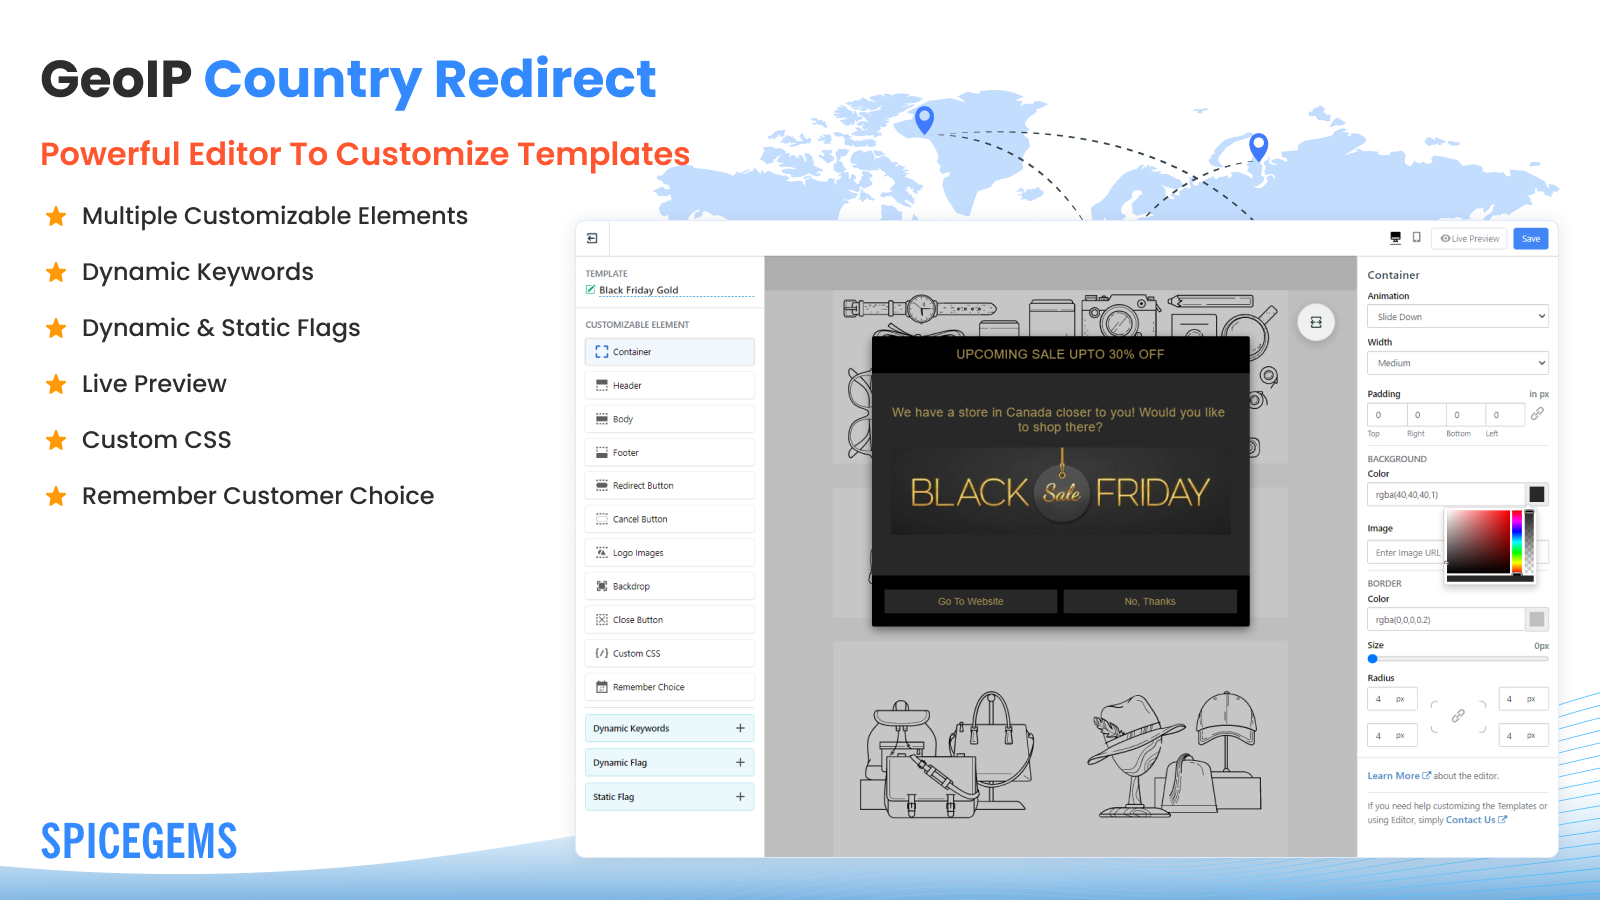 Display Redirect Message in a Popup - Shopify